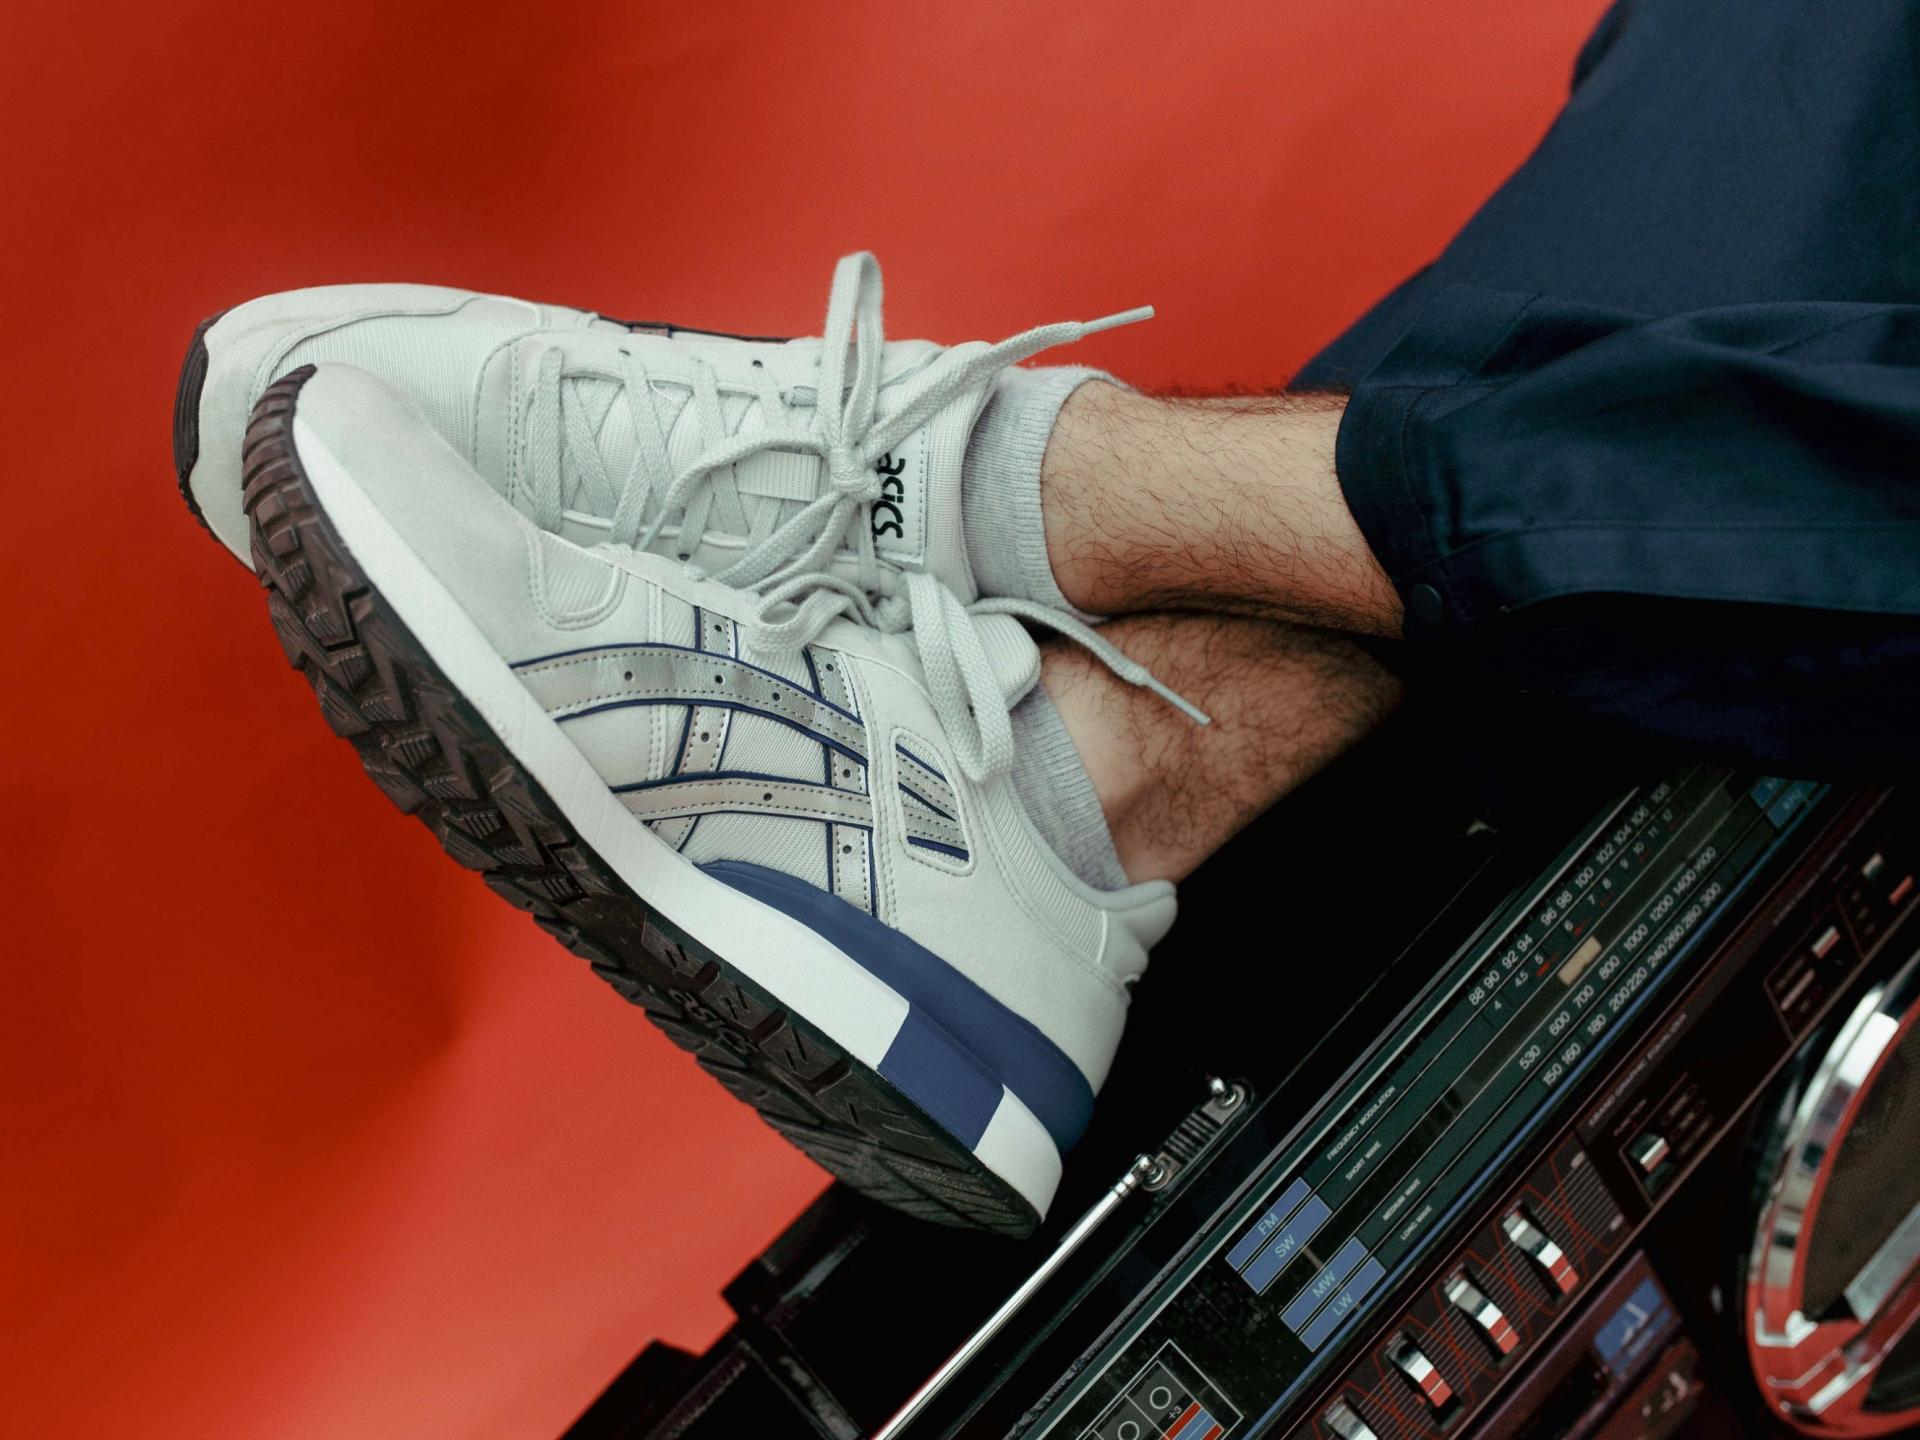 Asics GT-II: the first GEL technology sneaker is back after 35